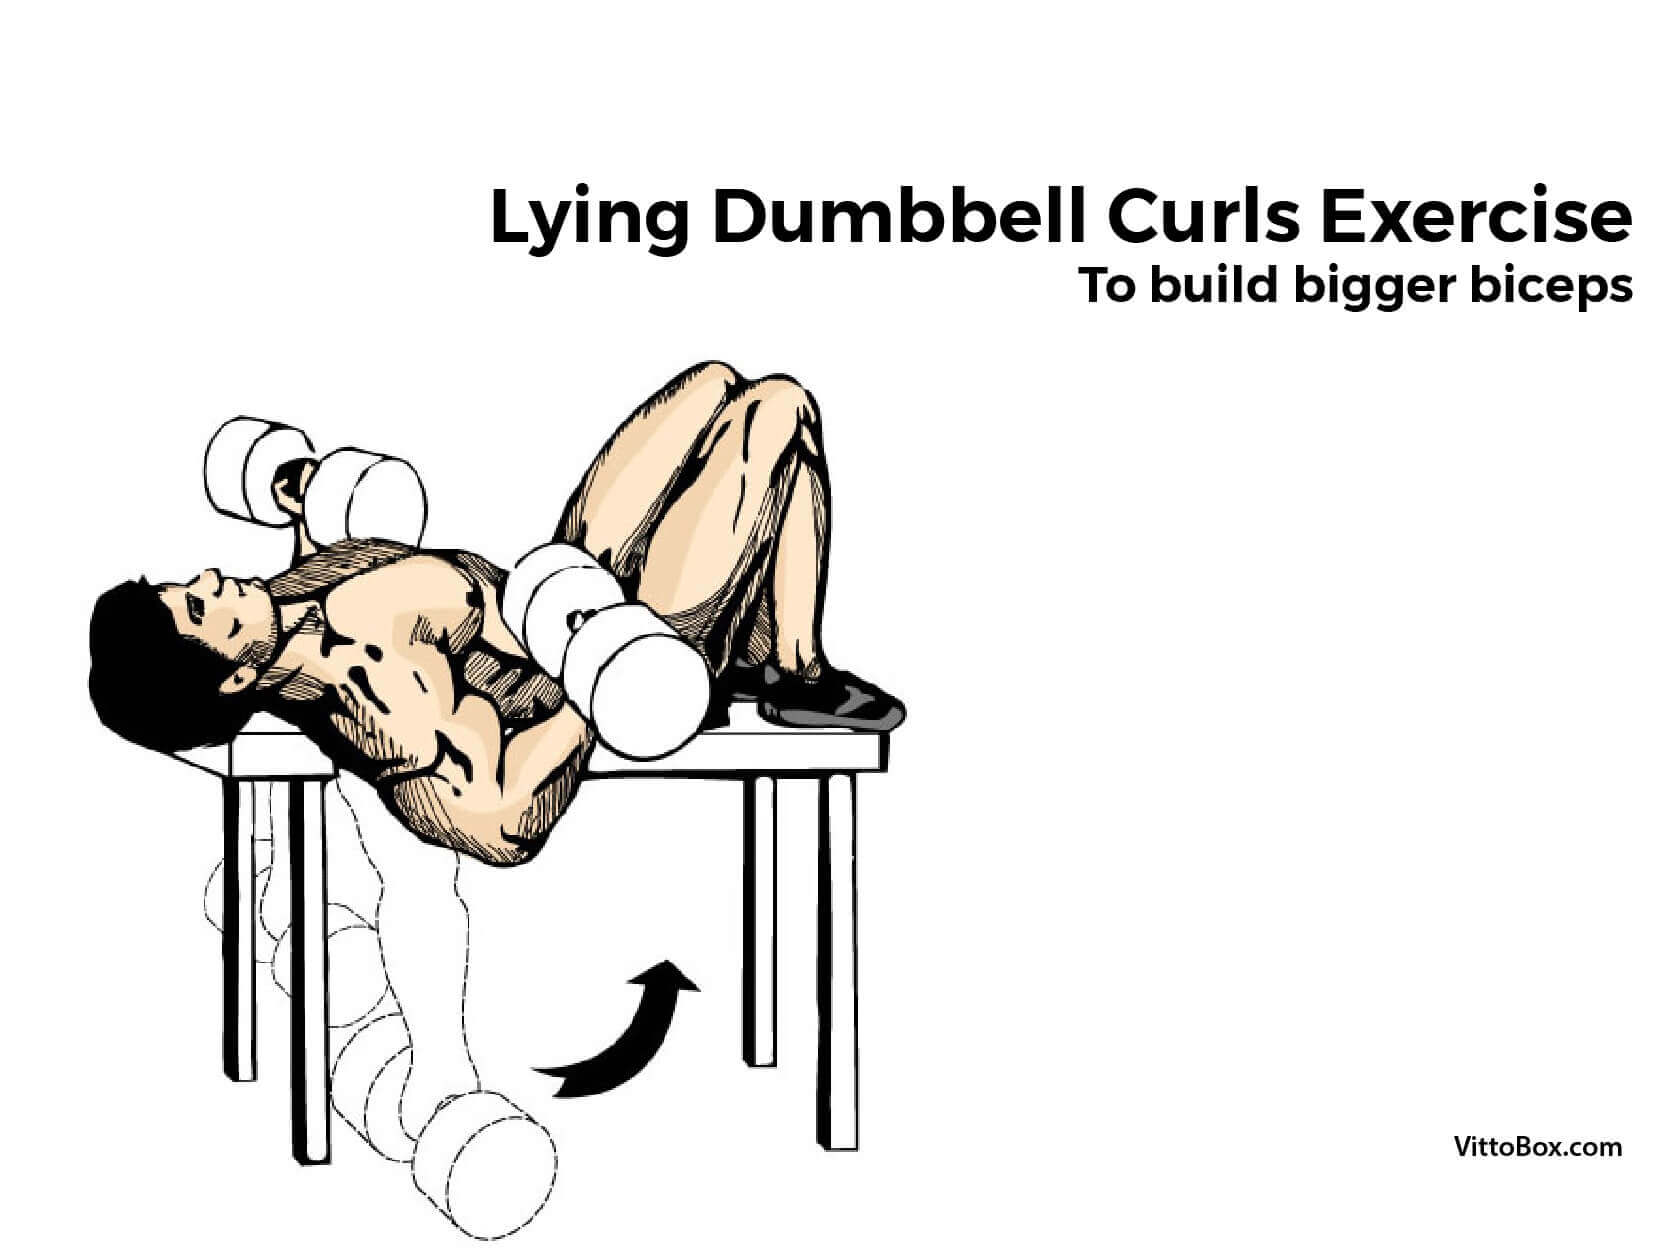 Lying Dumbbell Curls Exercise To Build Bigger Biceps